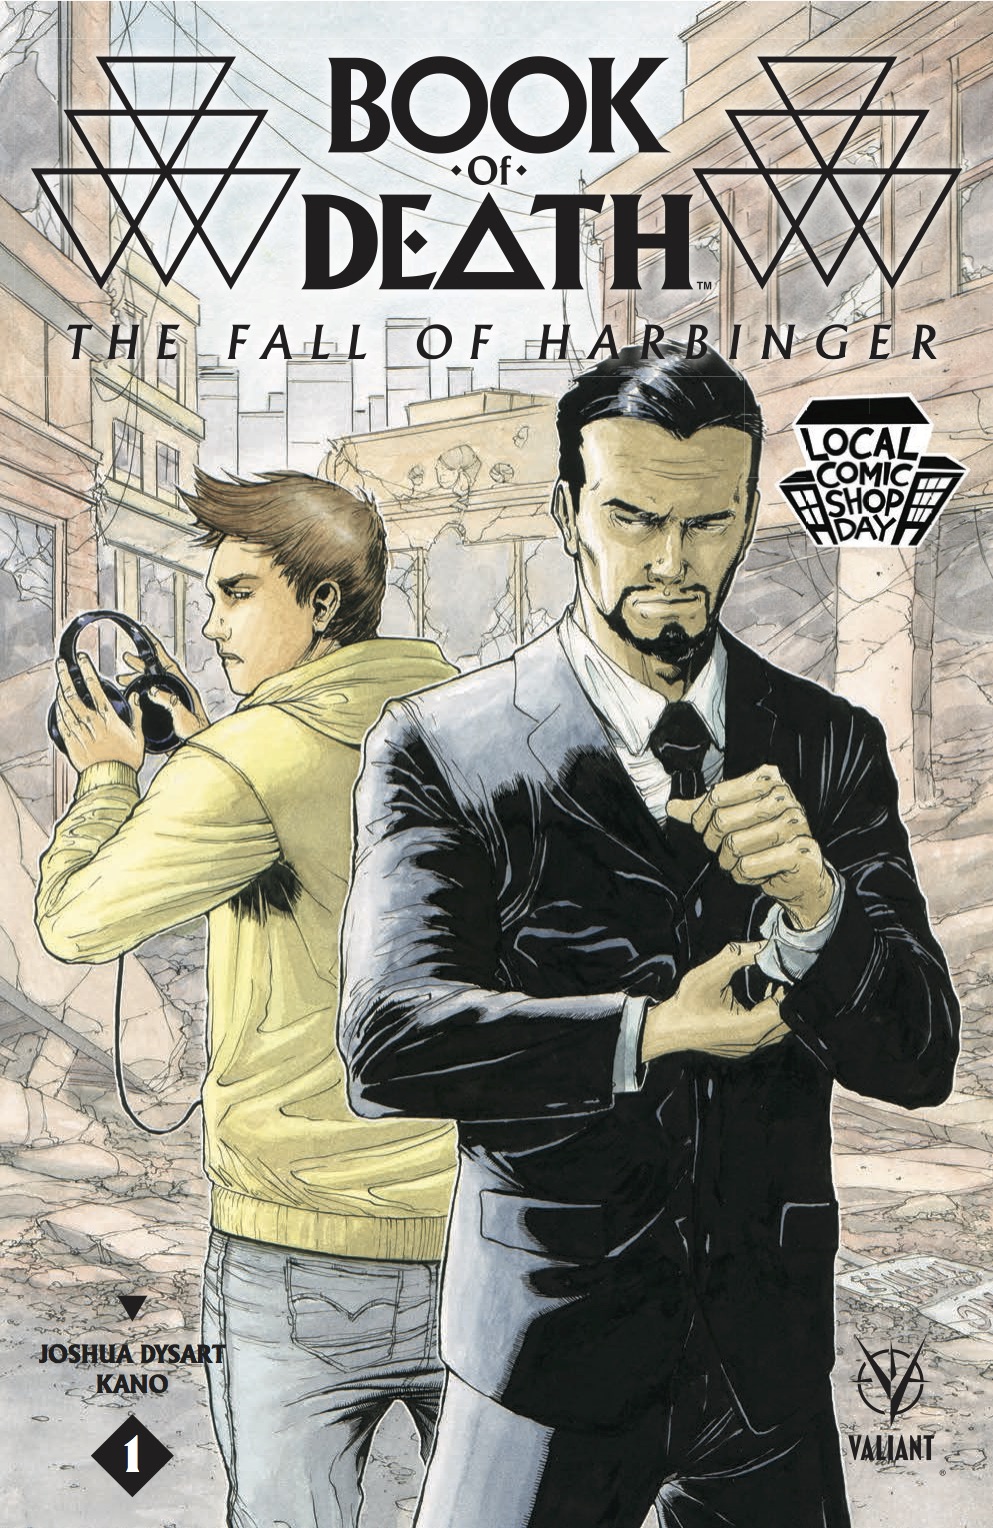 LCSD 2015 BOOK OF DEATH FALL OF HARBINGER #1